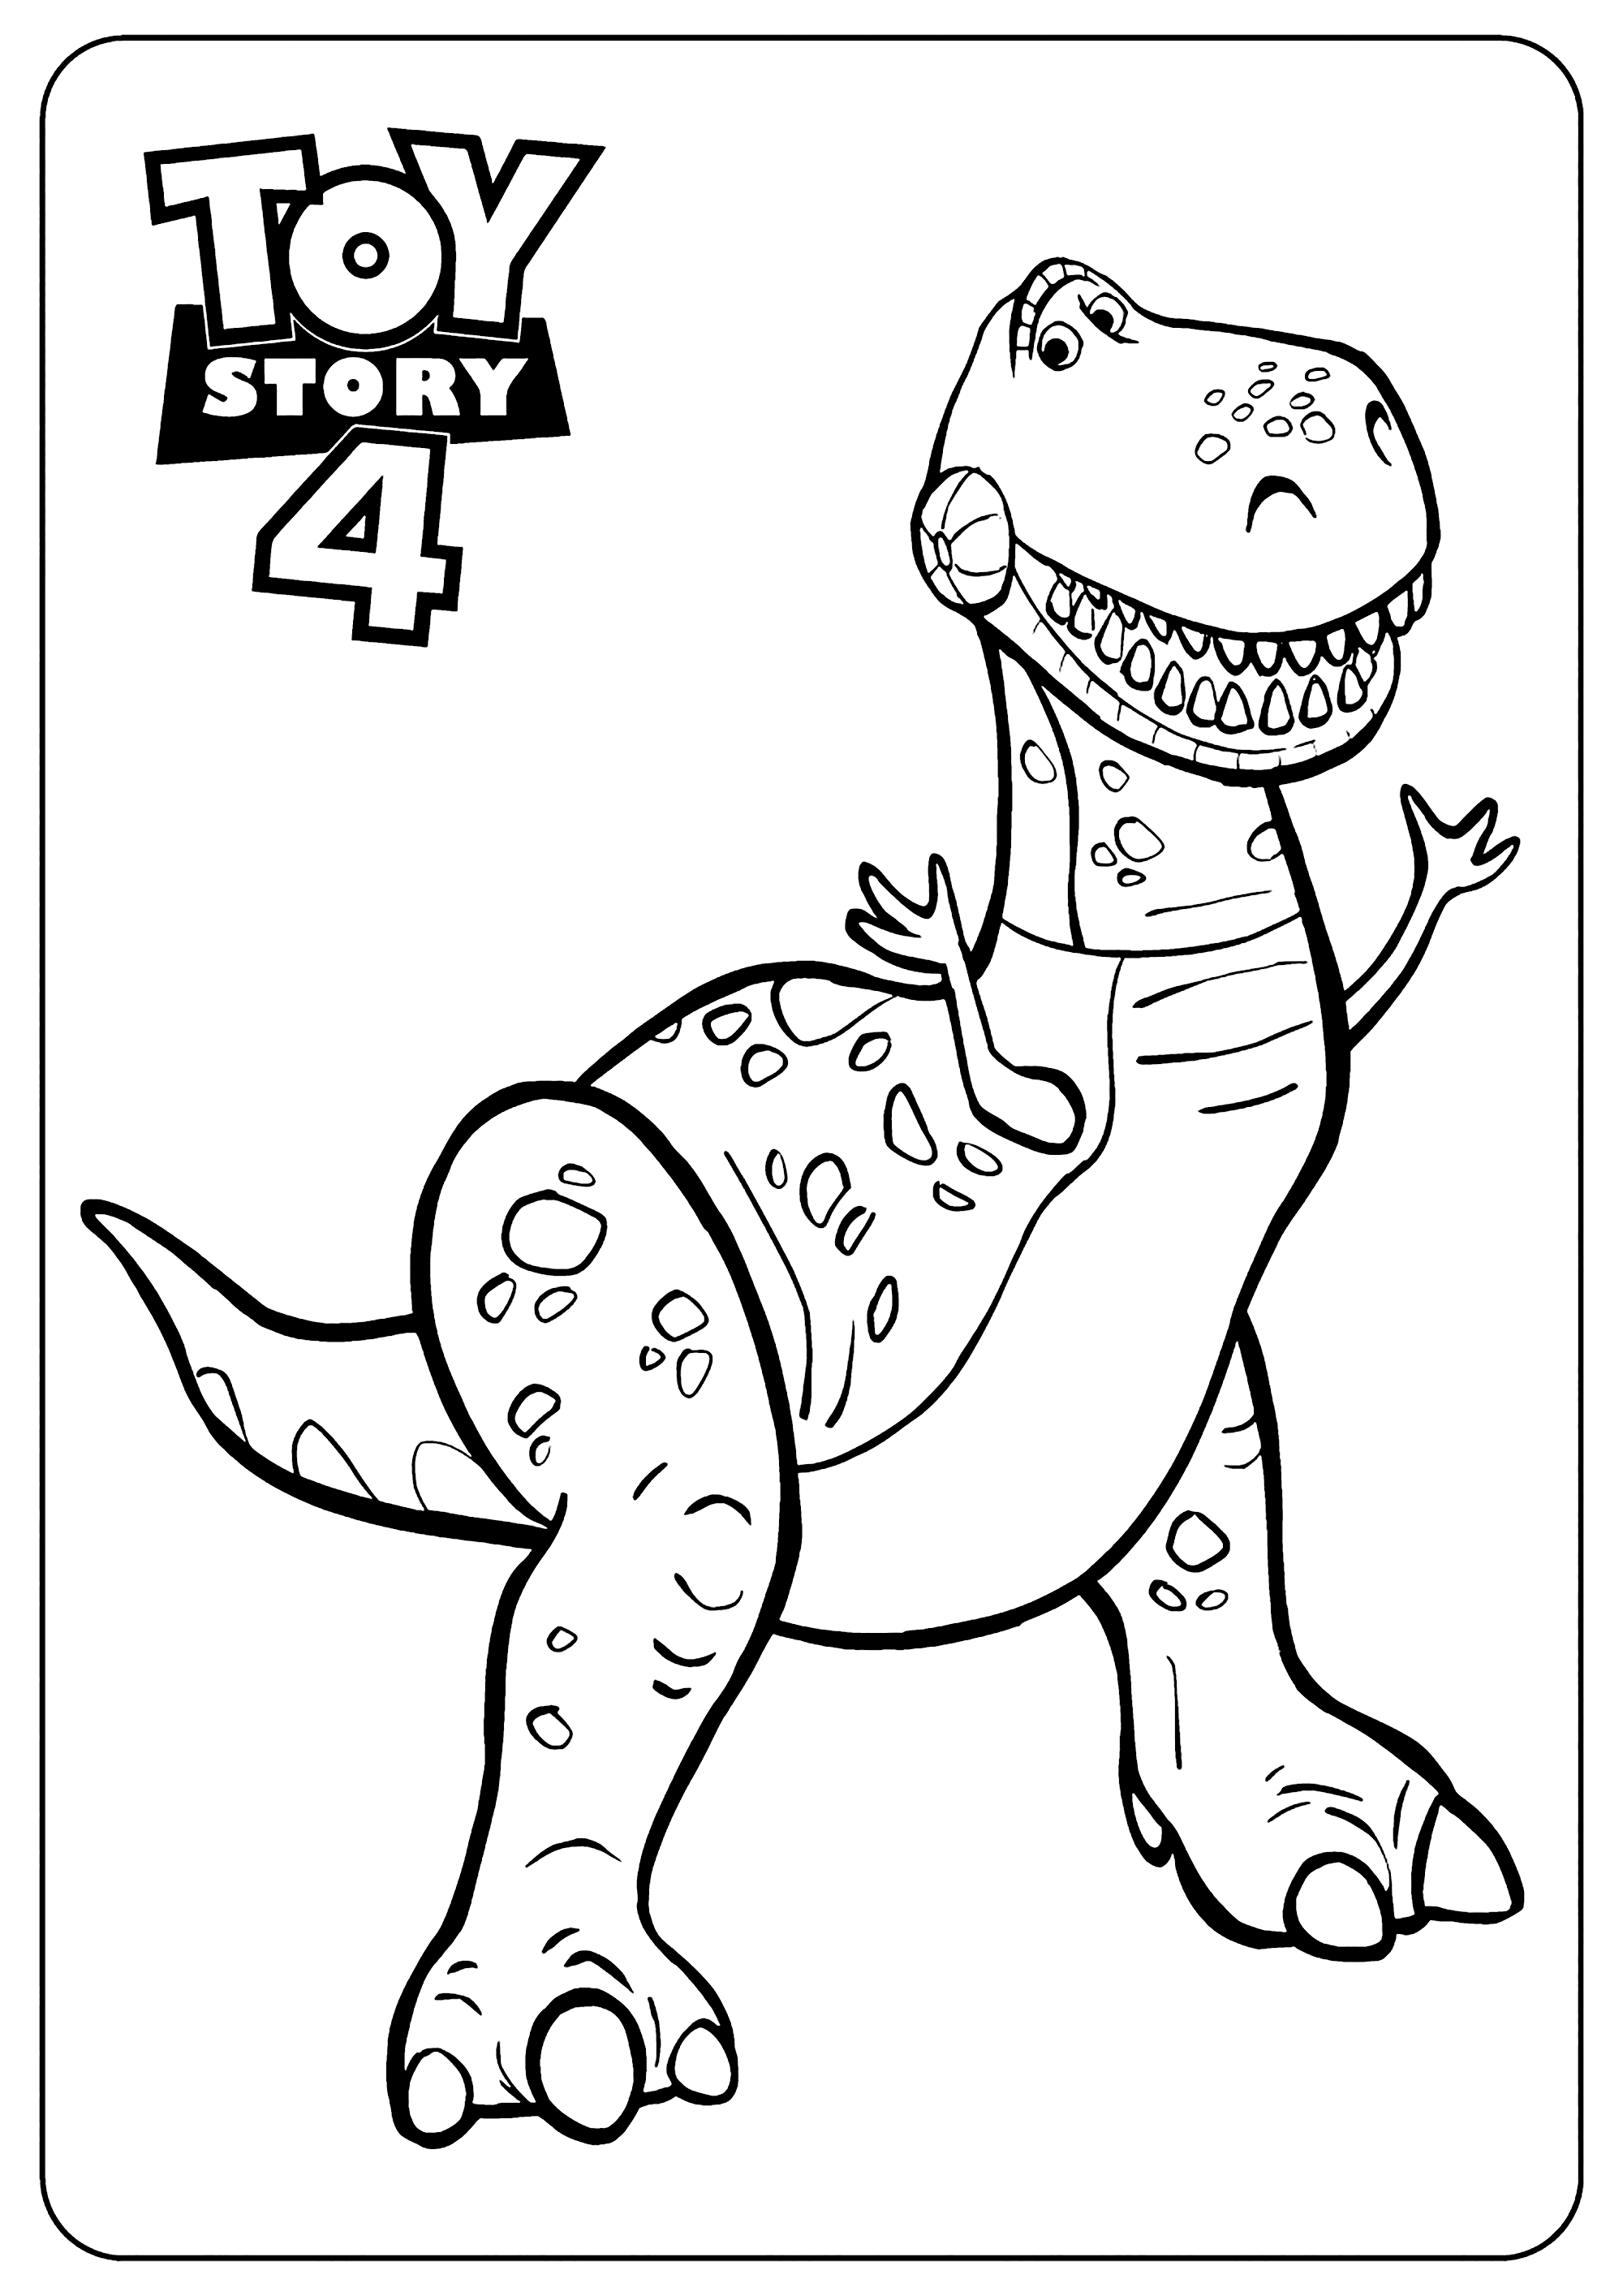 rex-cool-toy-story-4-coloring-pages-toy-story-4-kids-coloring-pages